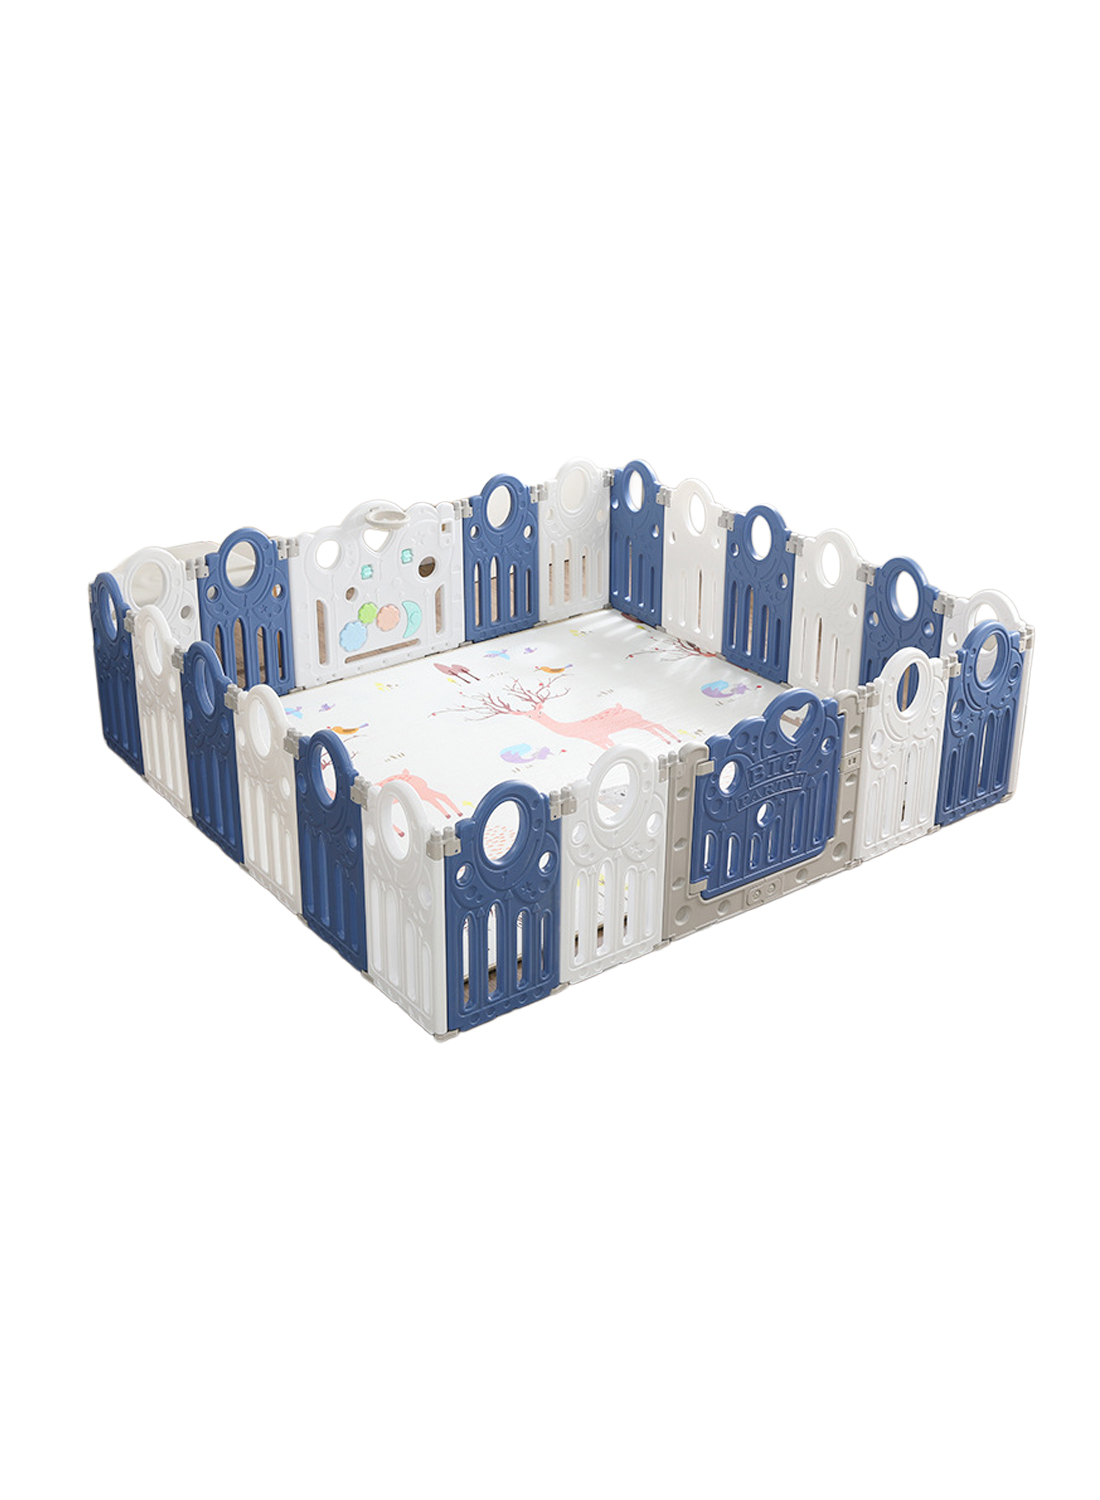 Baby Playard Children's Game Fence Foldable fence Baby Playard Easy Assemble and Storage